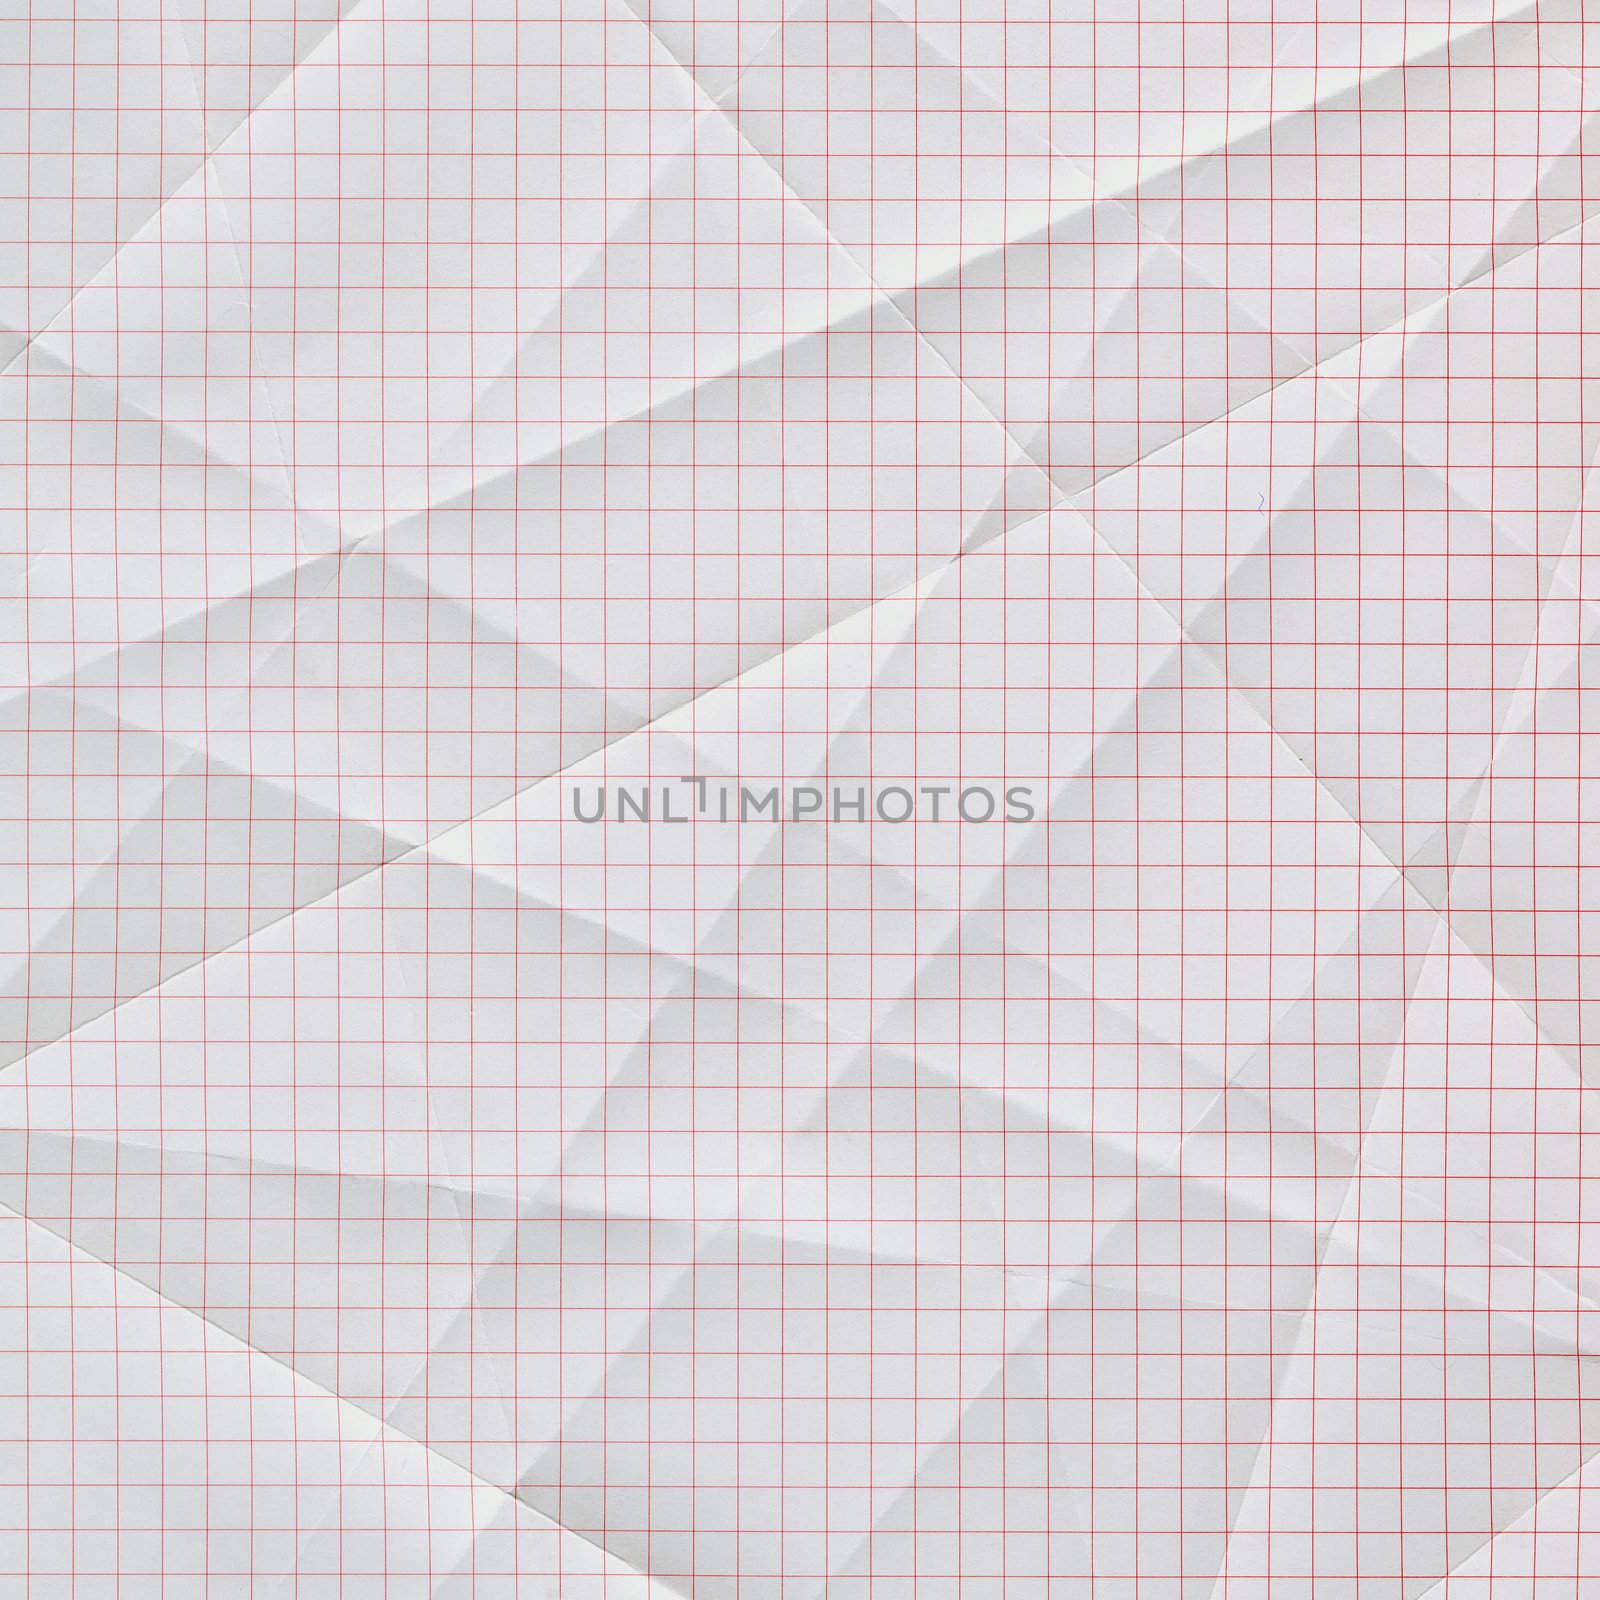 folded and creased white graph paper with red grid